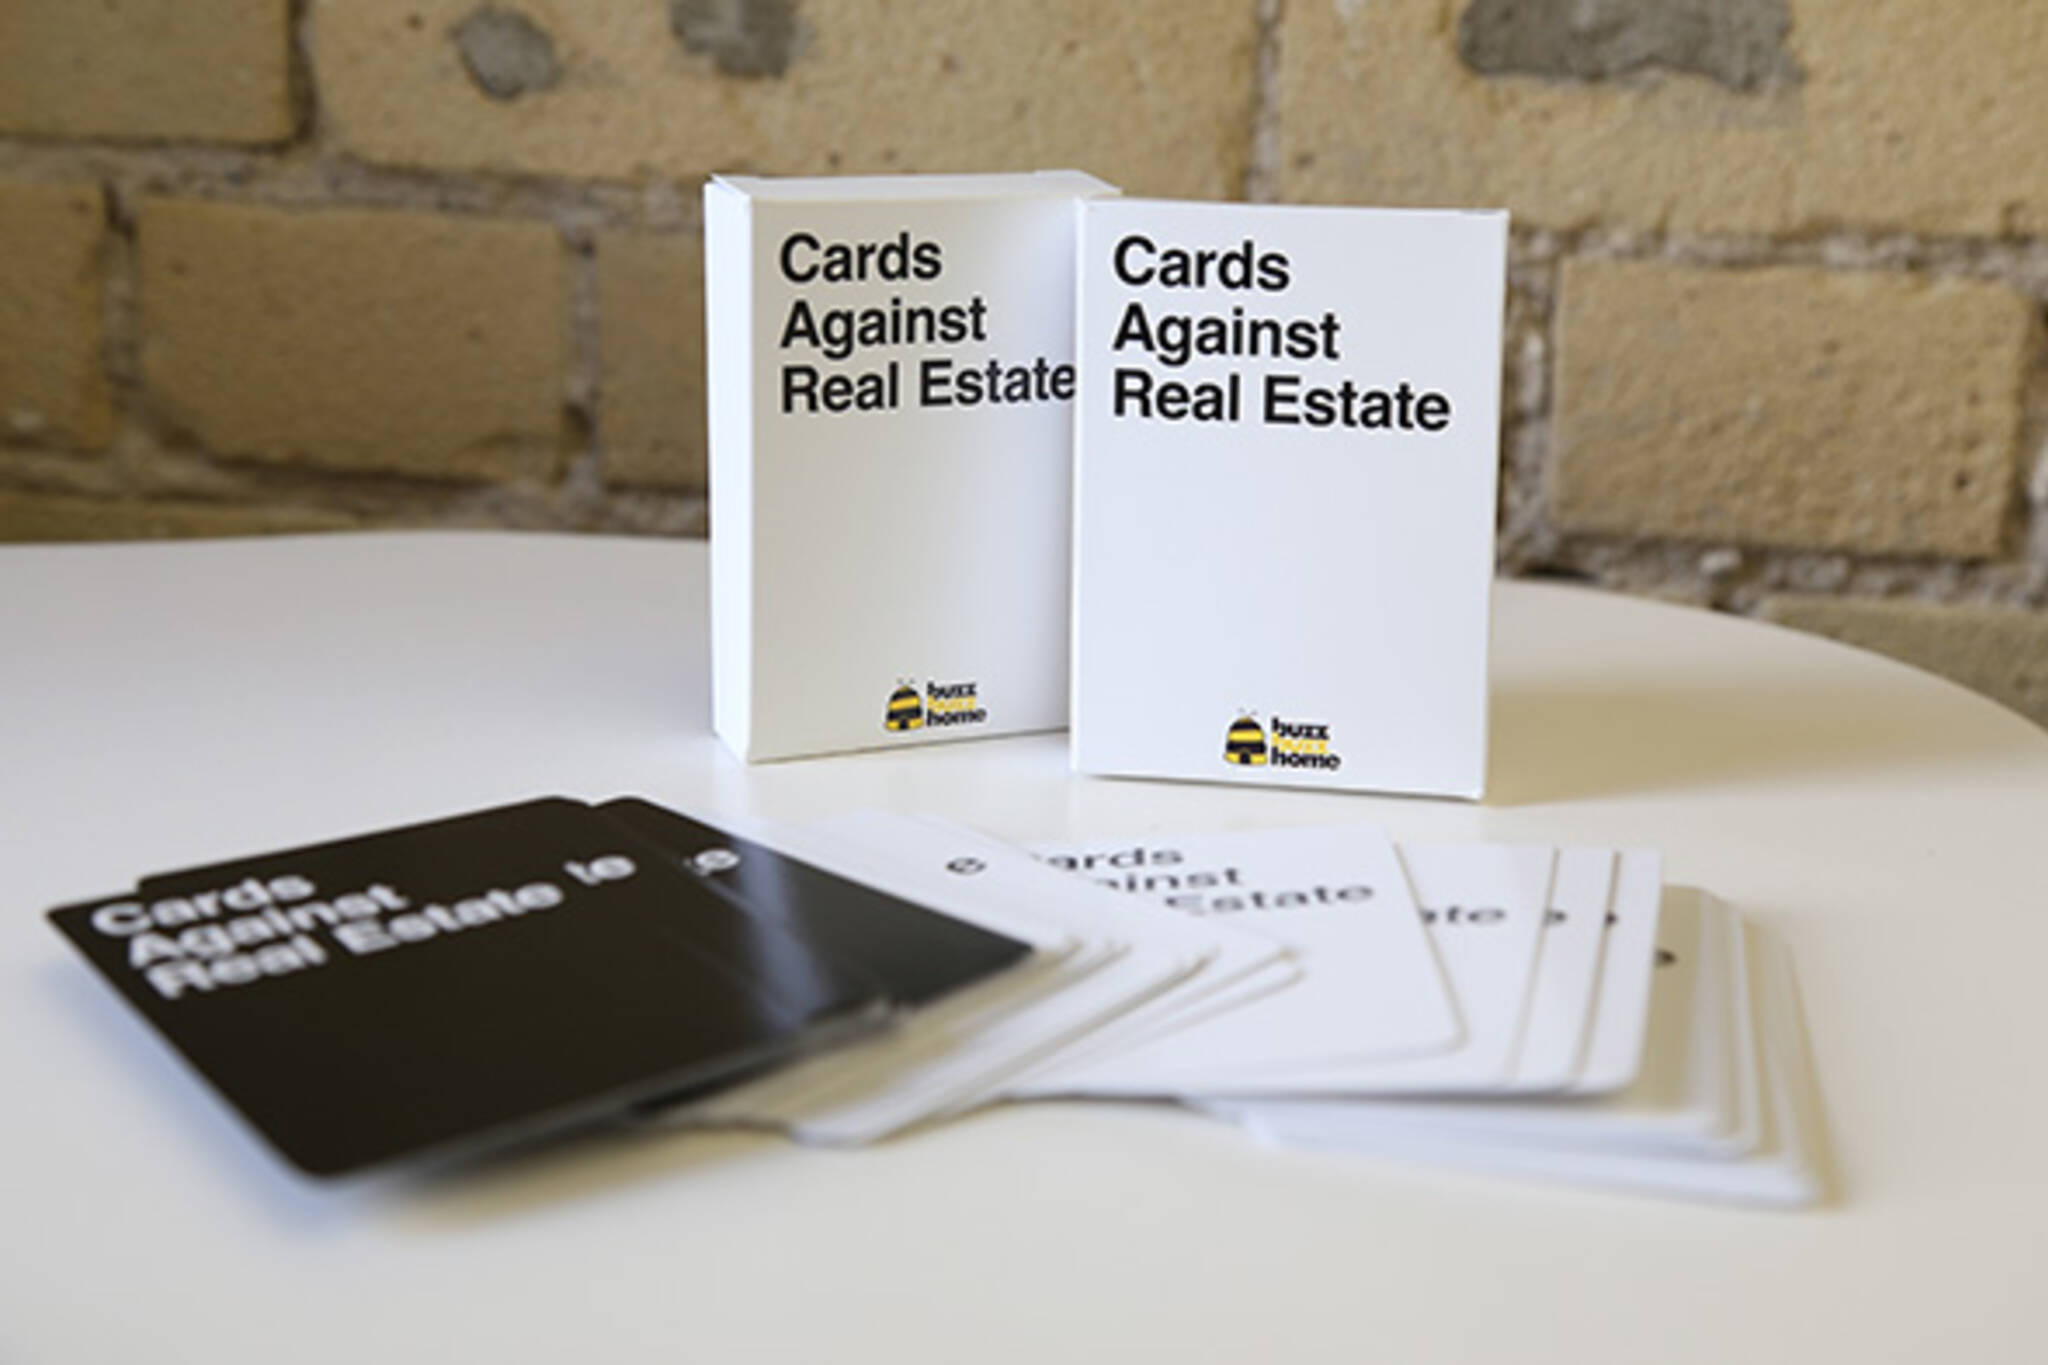 Cards against real estate toronto